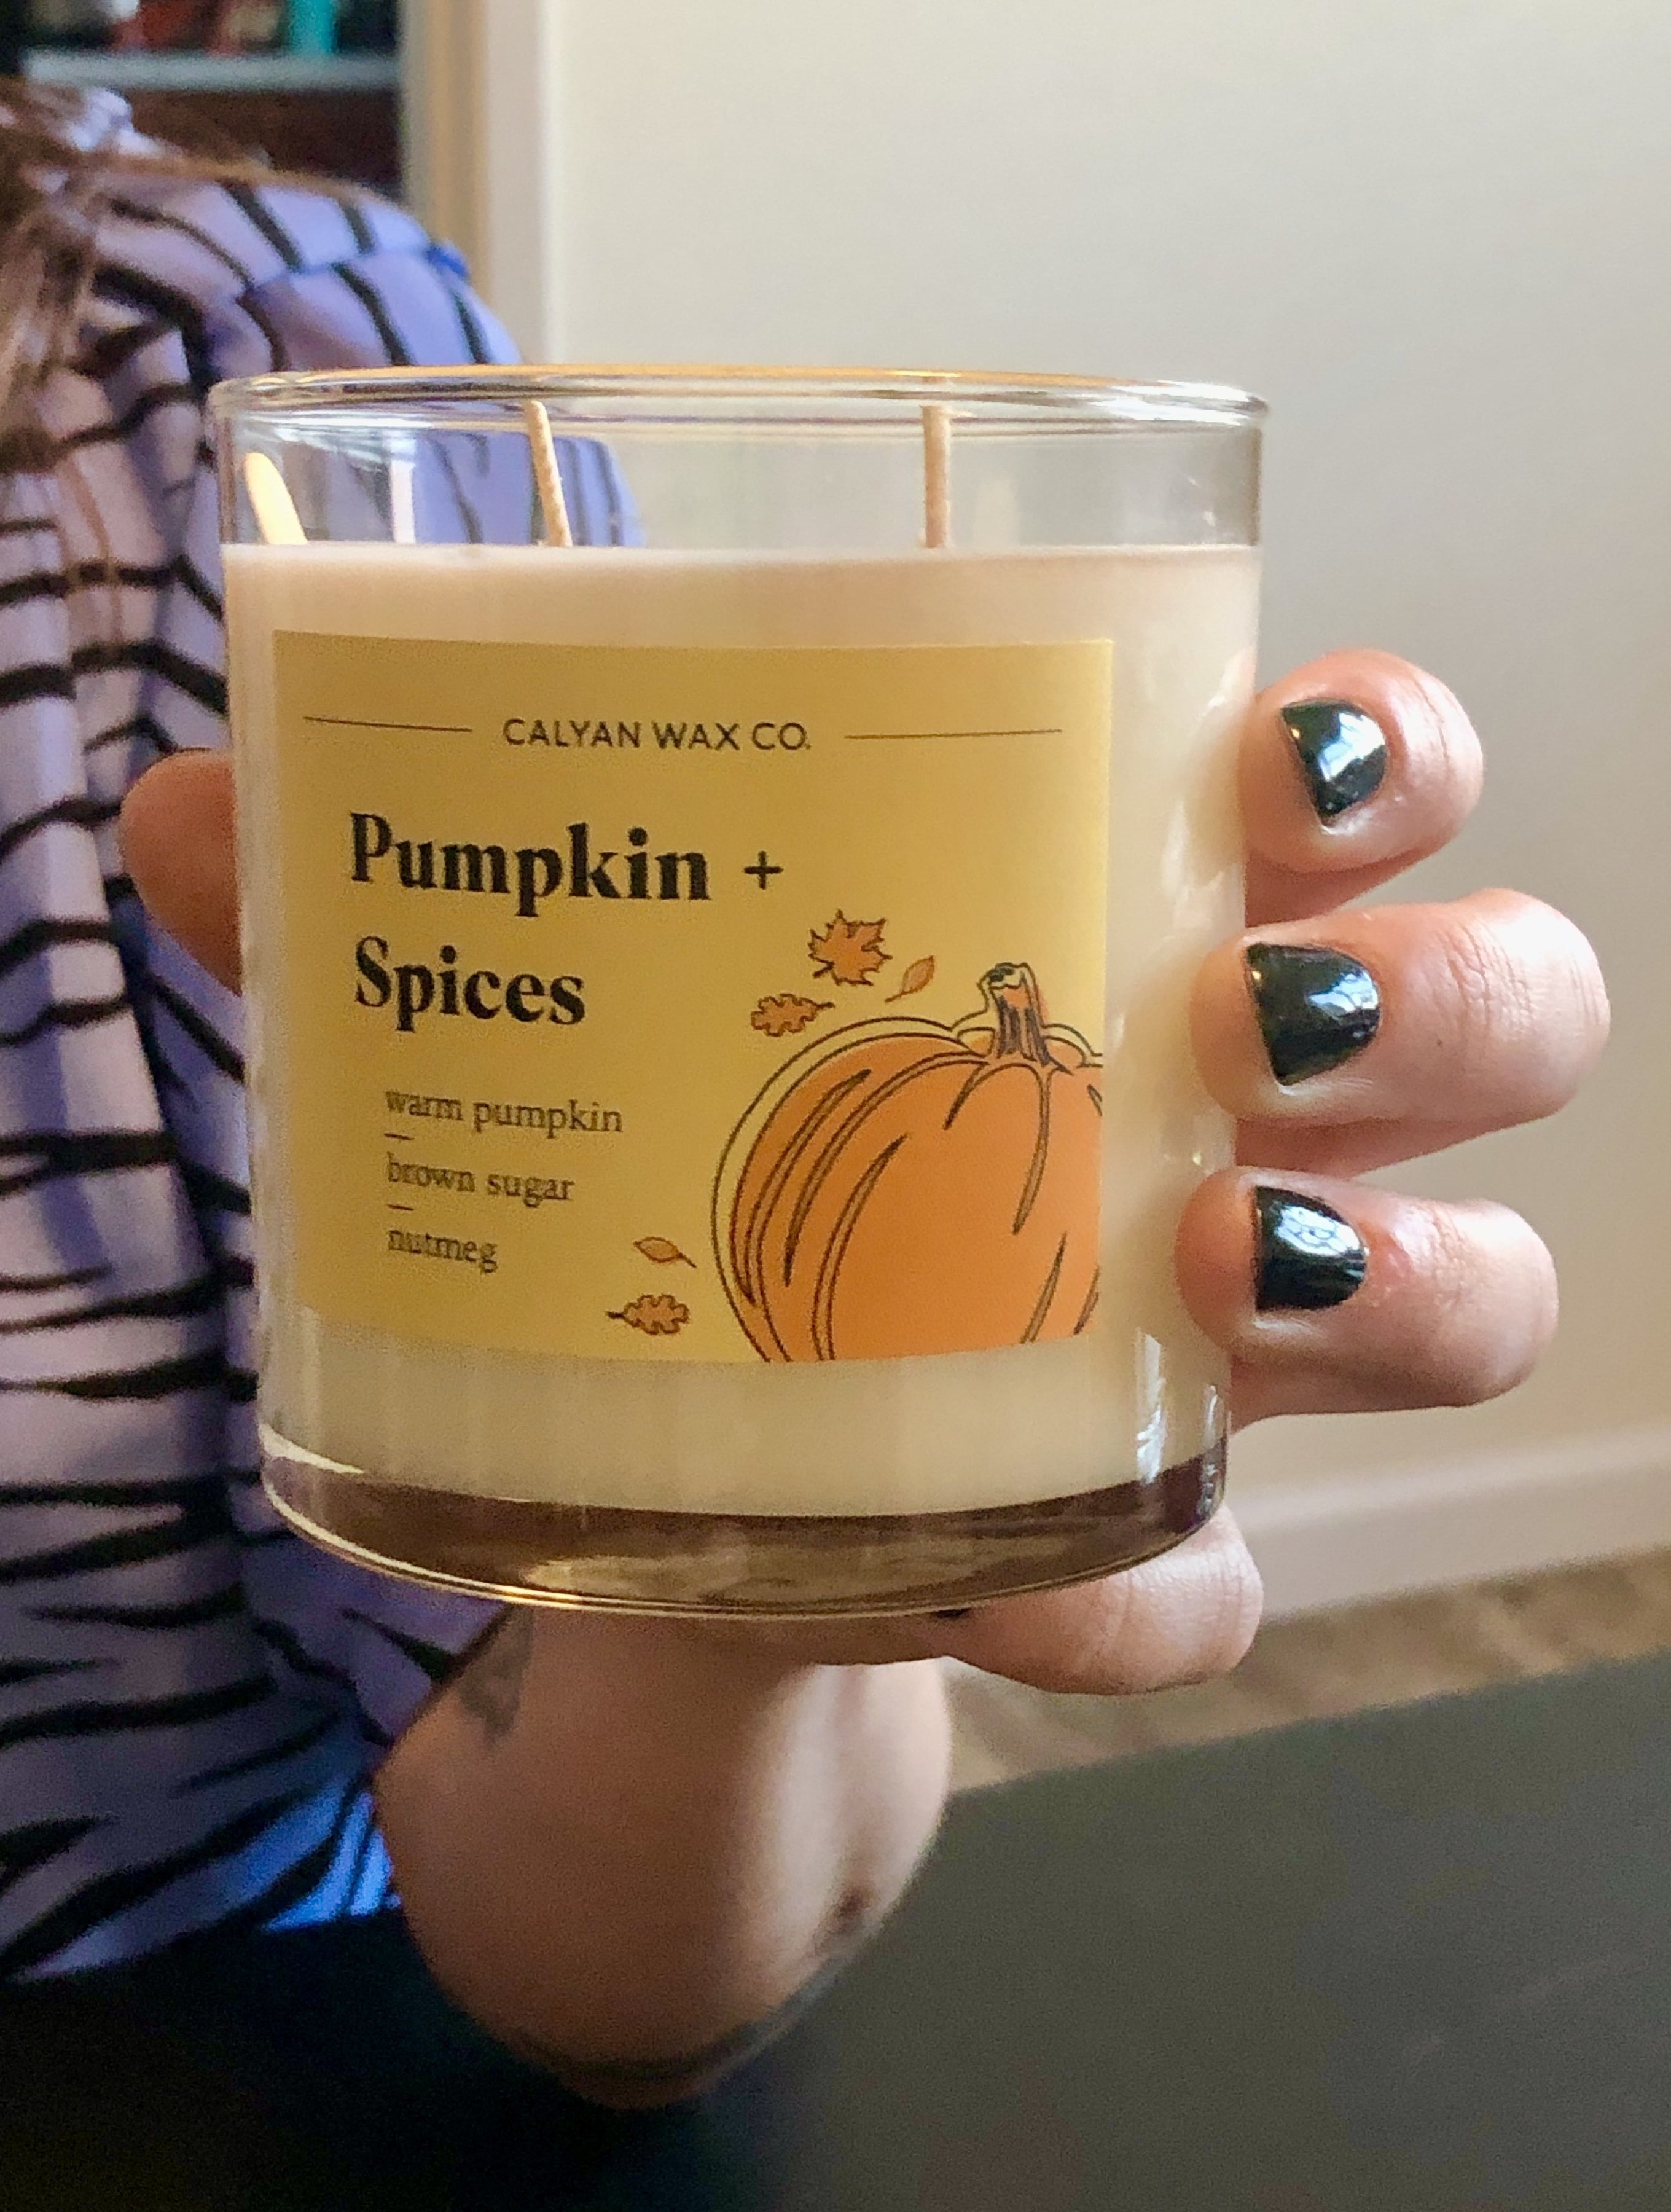 I hold up the pumpkin and spices candle